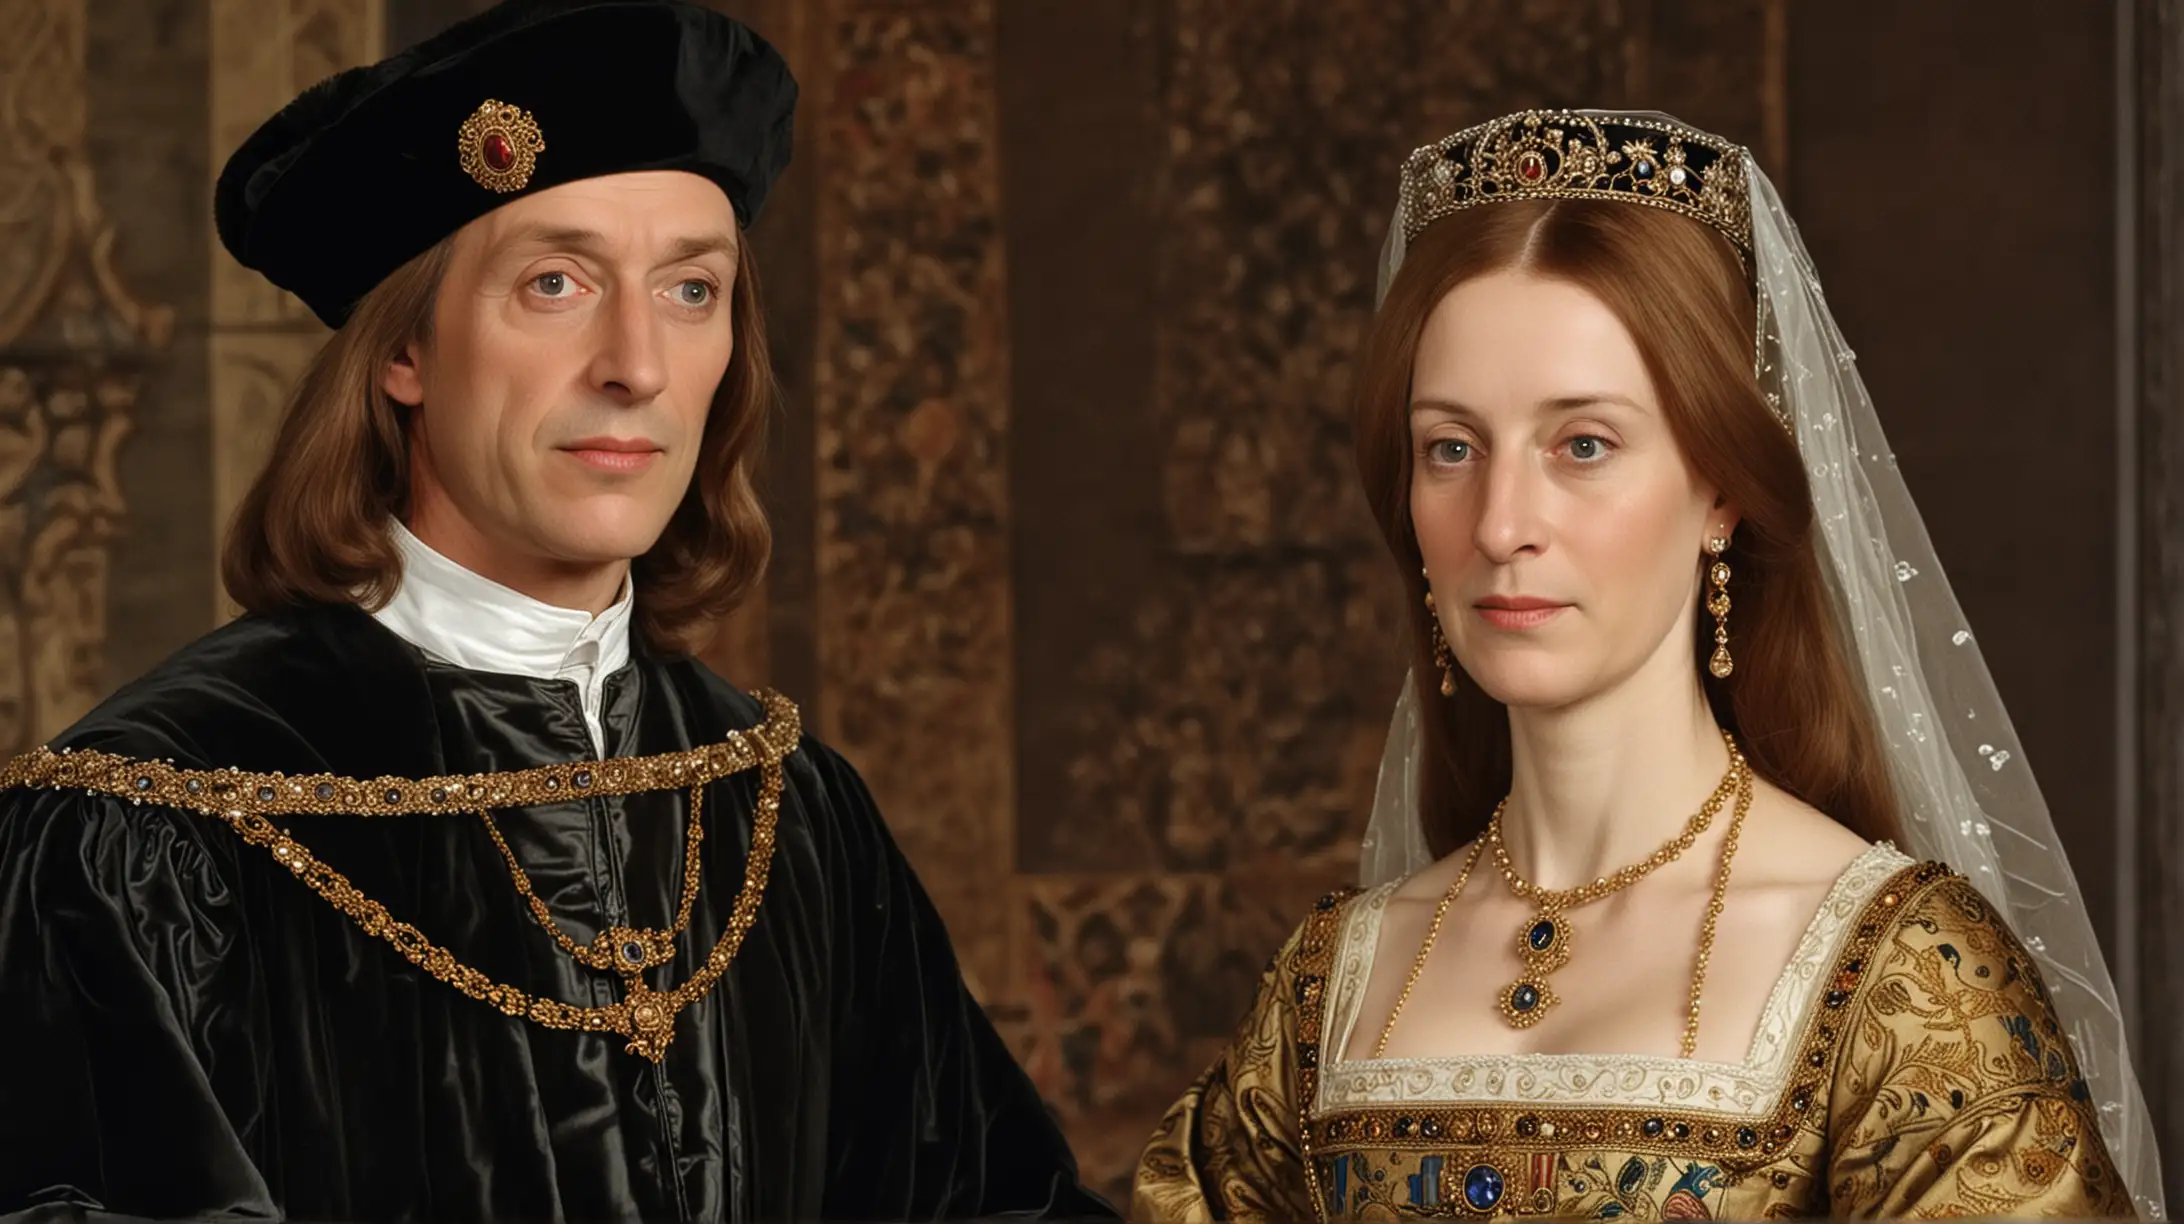 Royal Couple Henry VII and Elizabeth of York in Historical Regalia